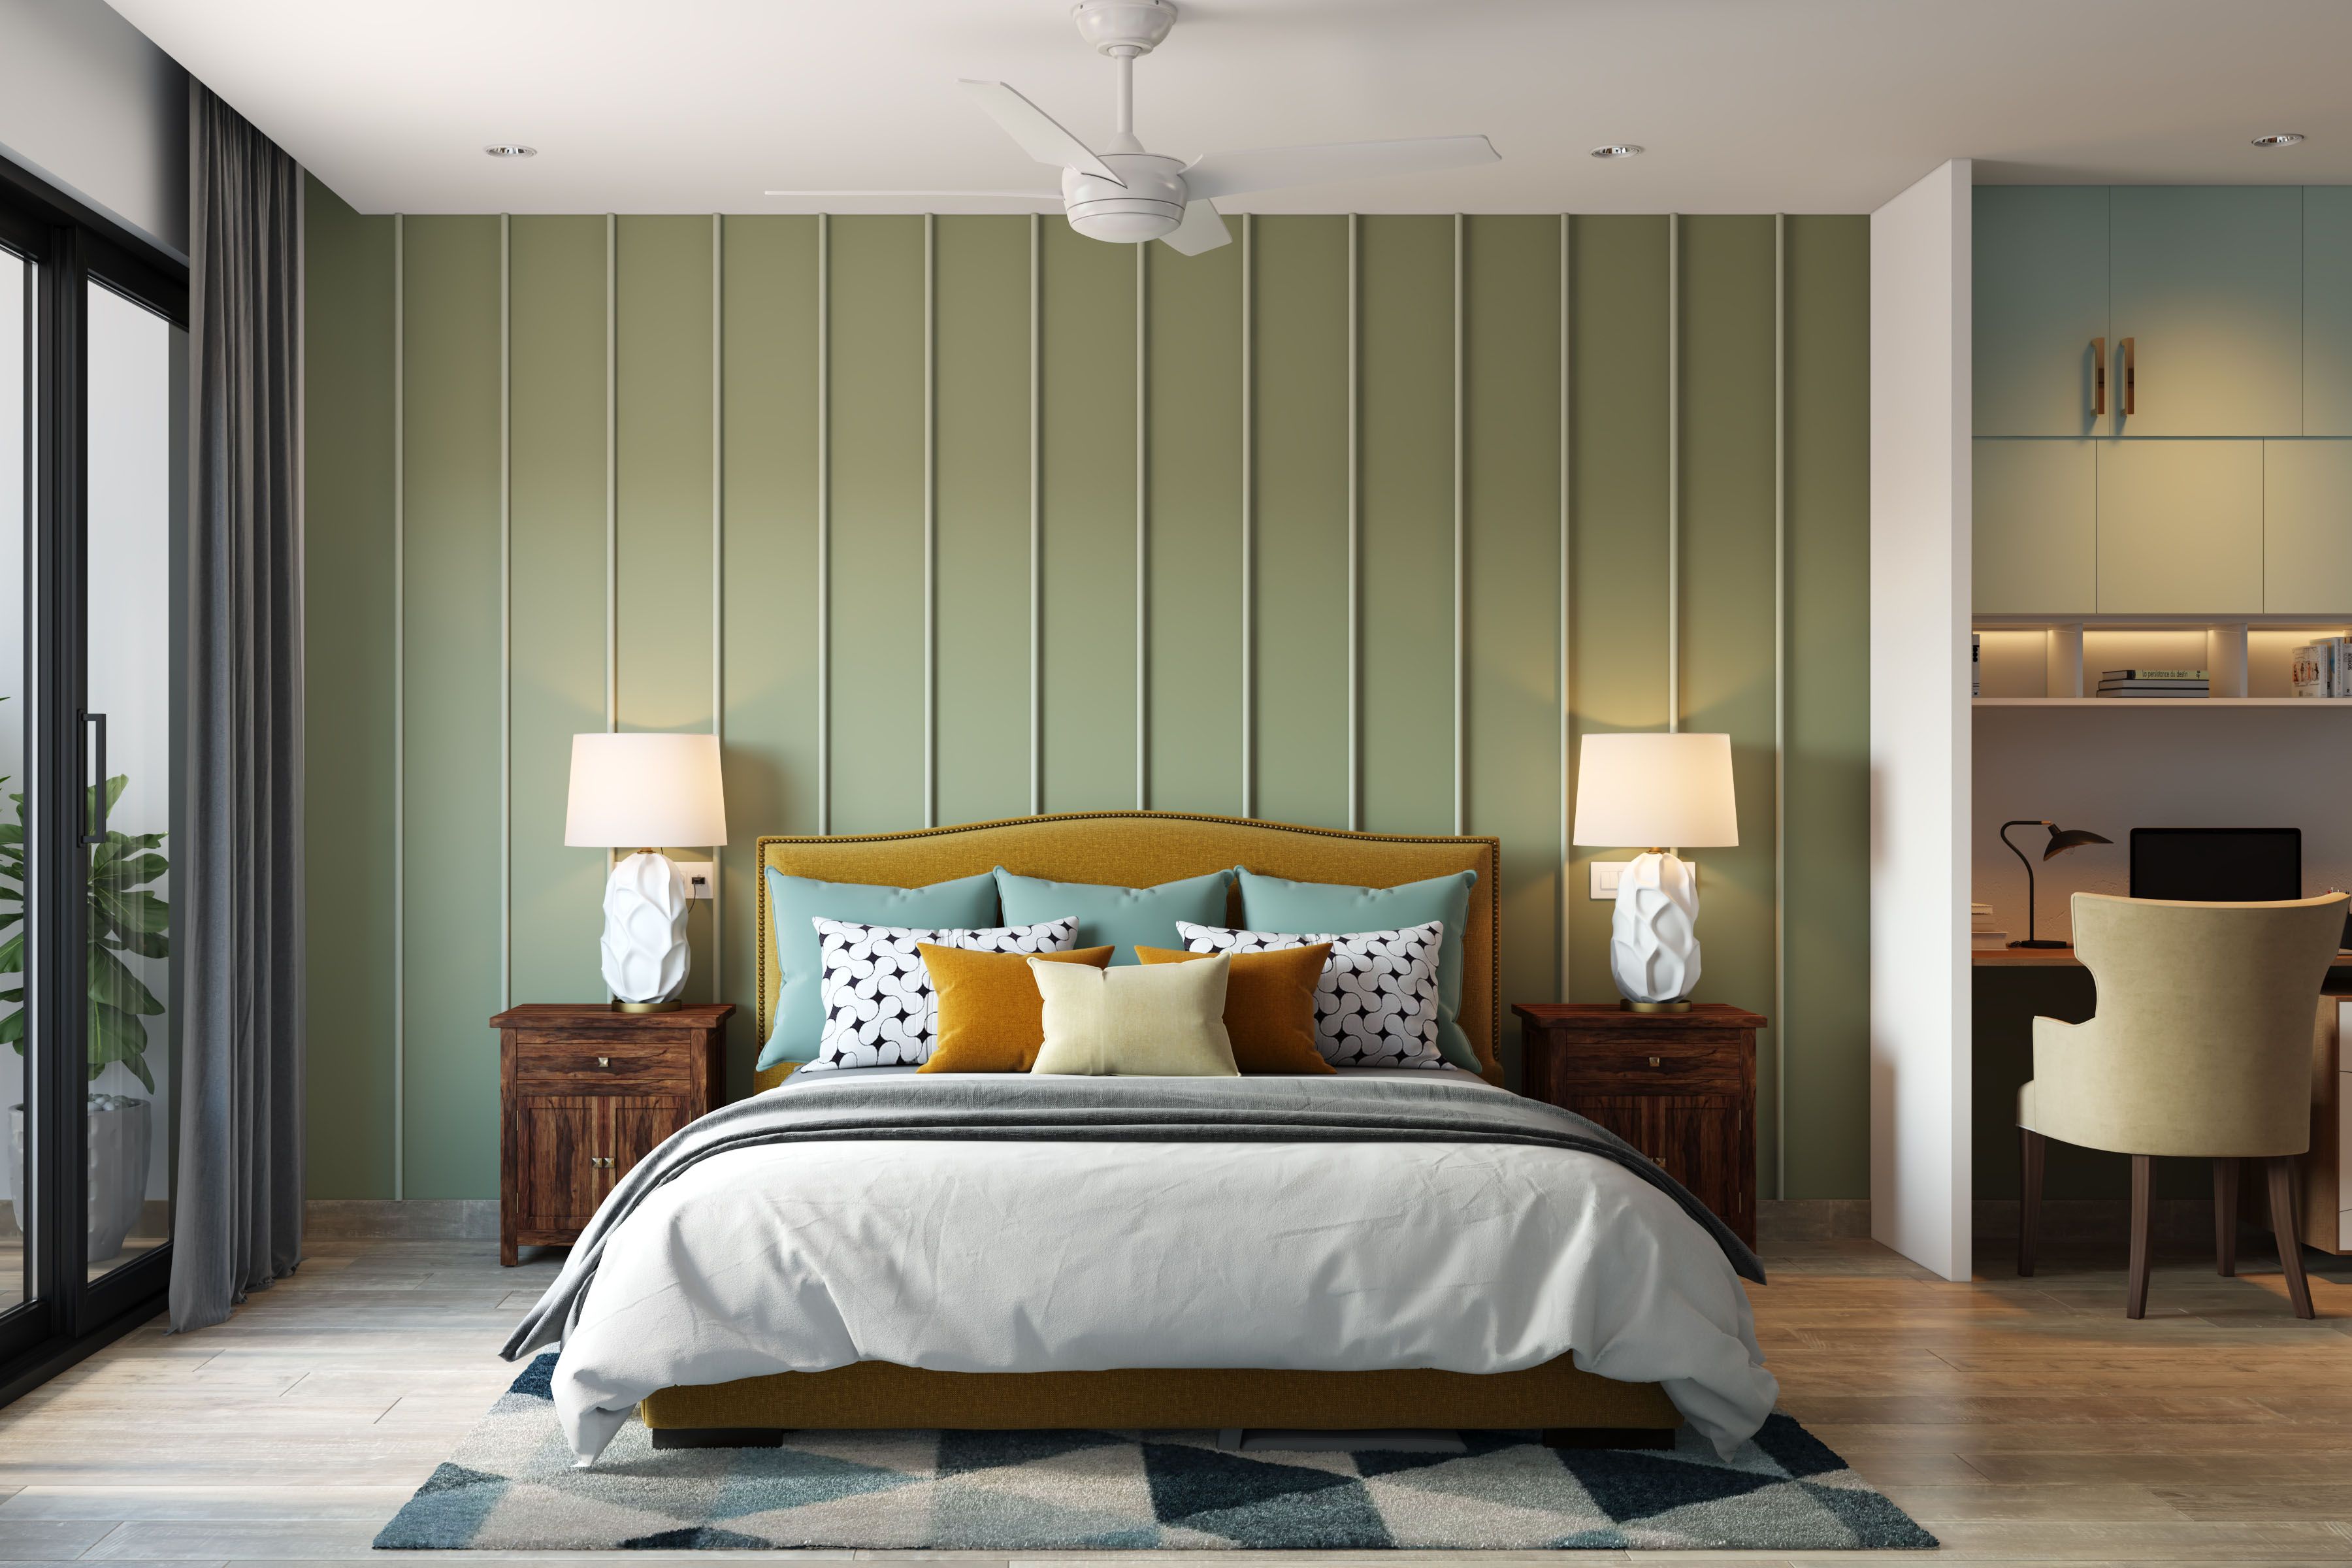 Contemporary Master Bedroom Design With Light Green Accent Wall And White Striped Panelling